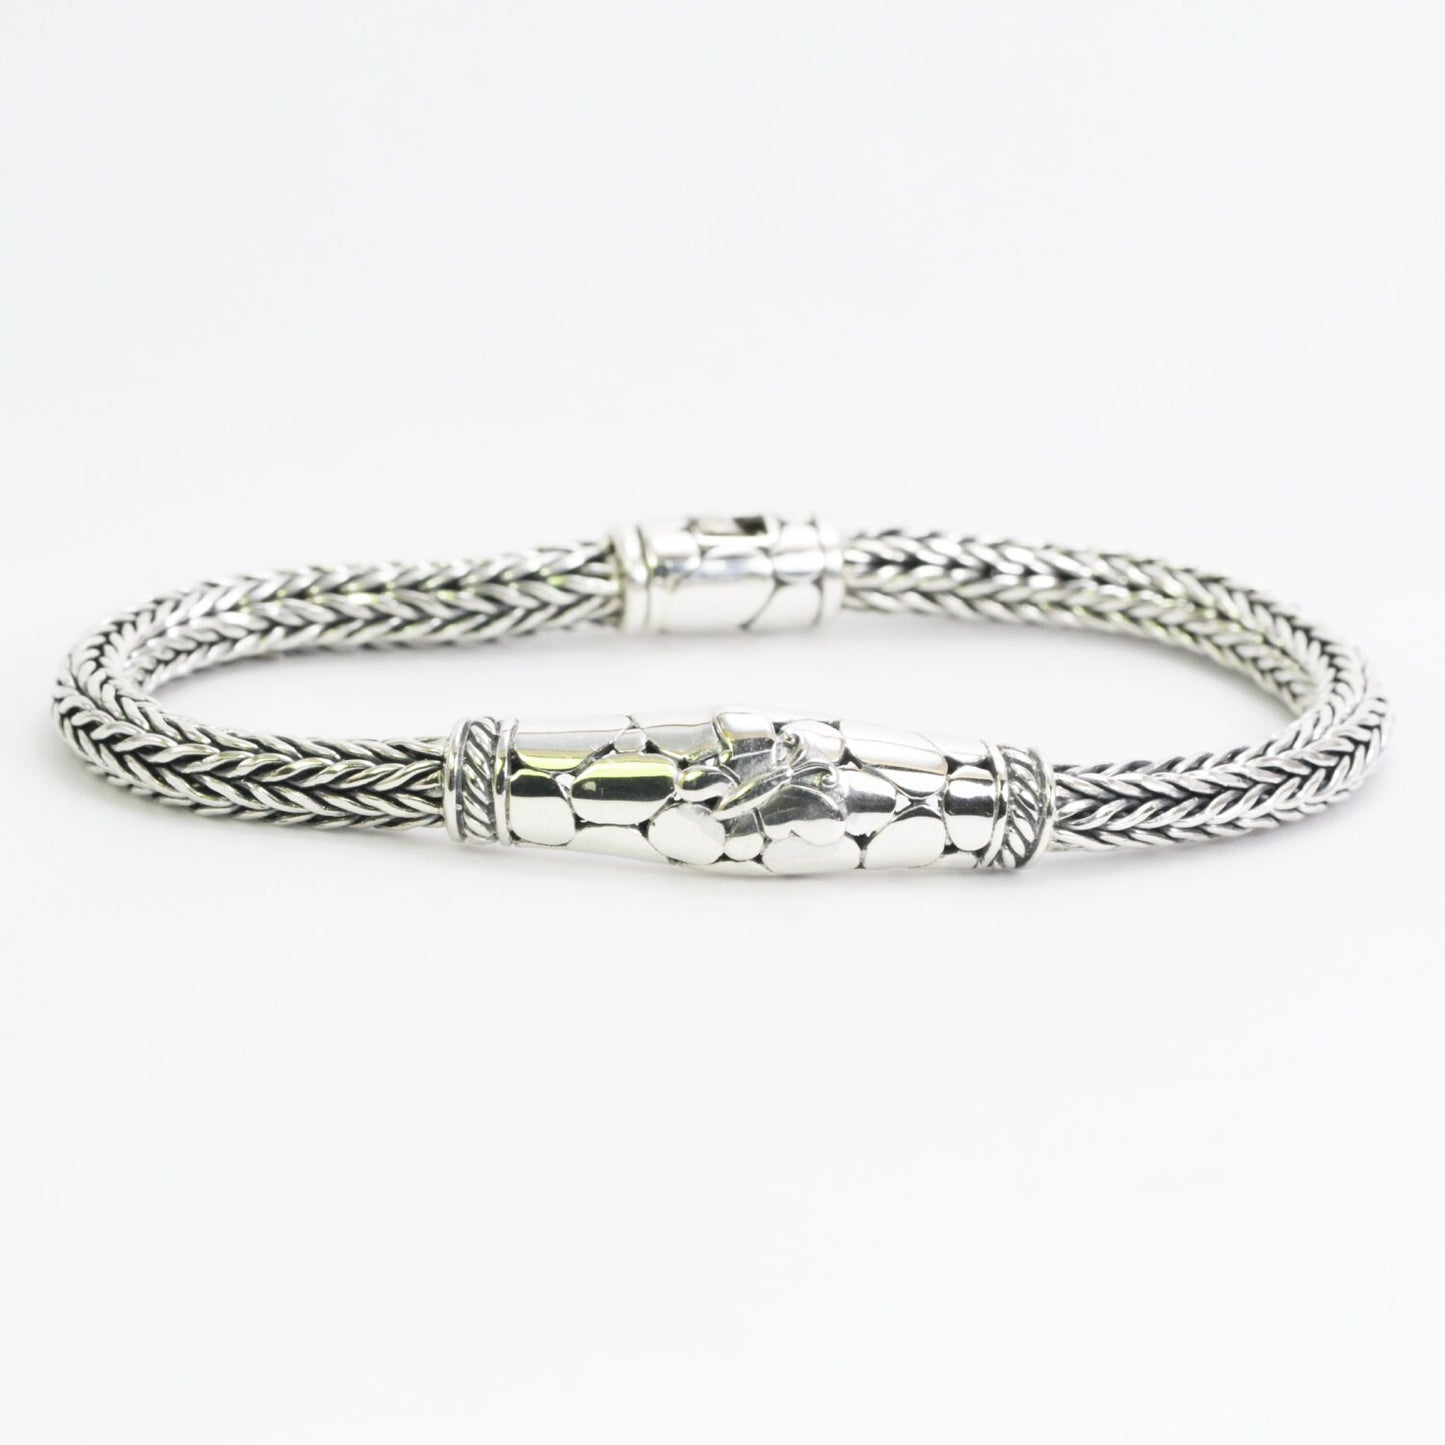 925 sterling silver bracelet 6MM round woven chain 7.5" inch length decorated with butterfly ornament